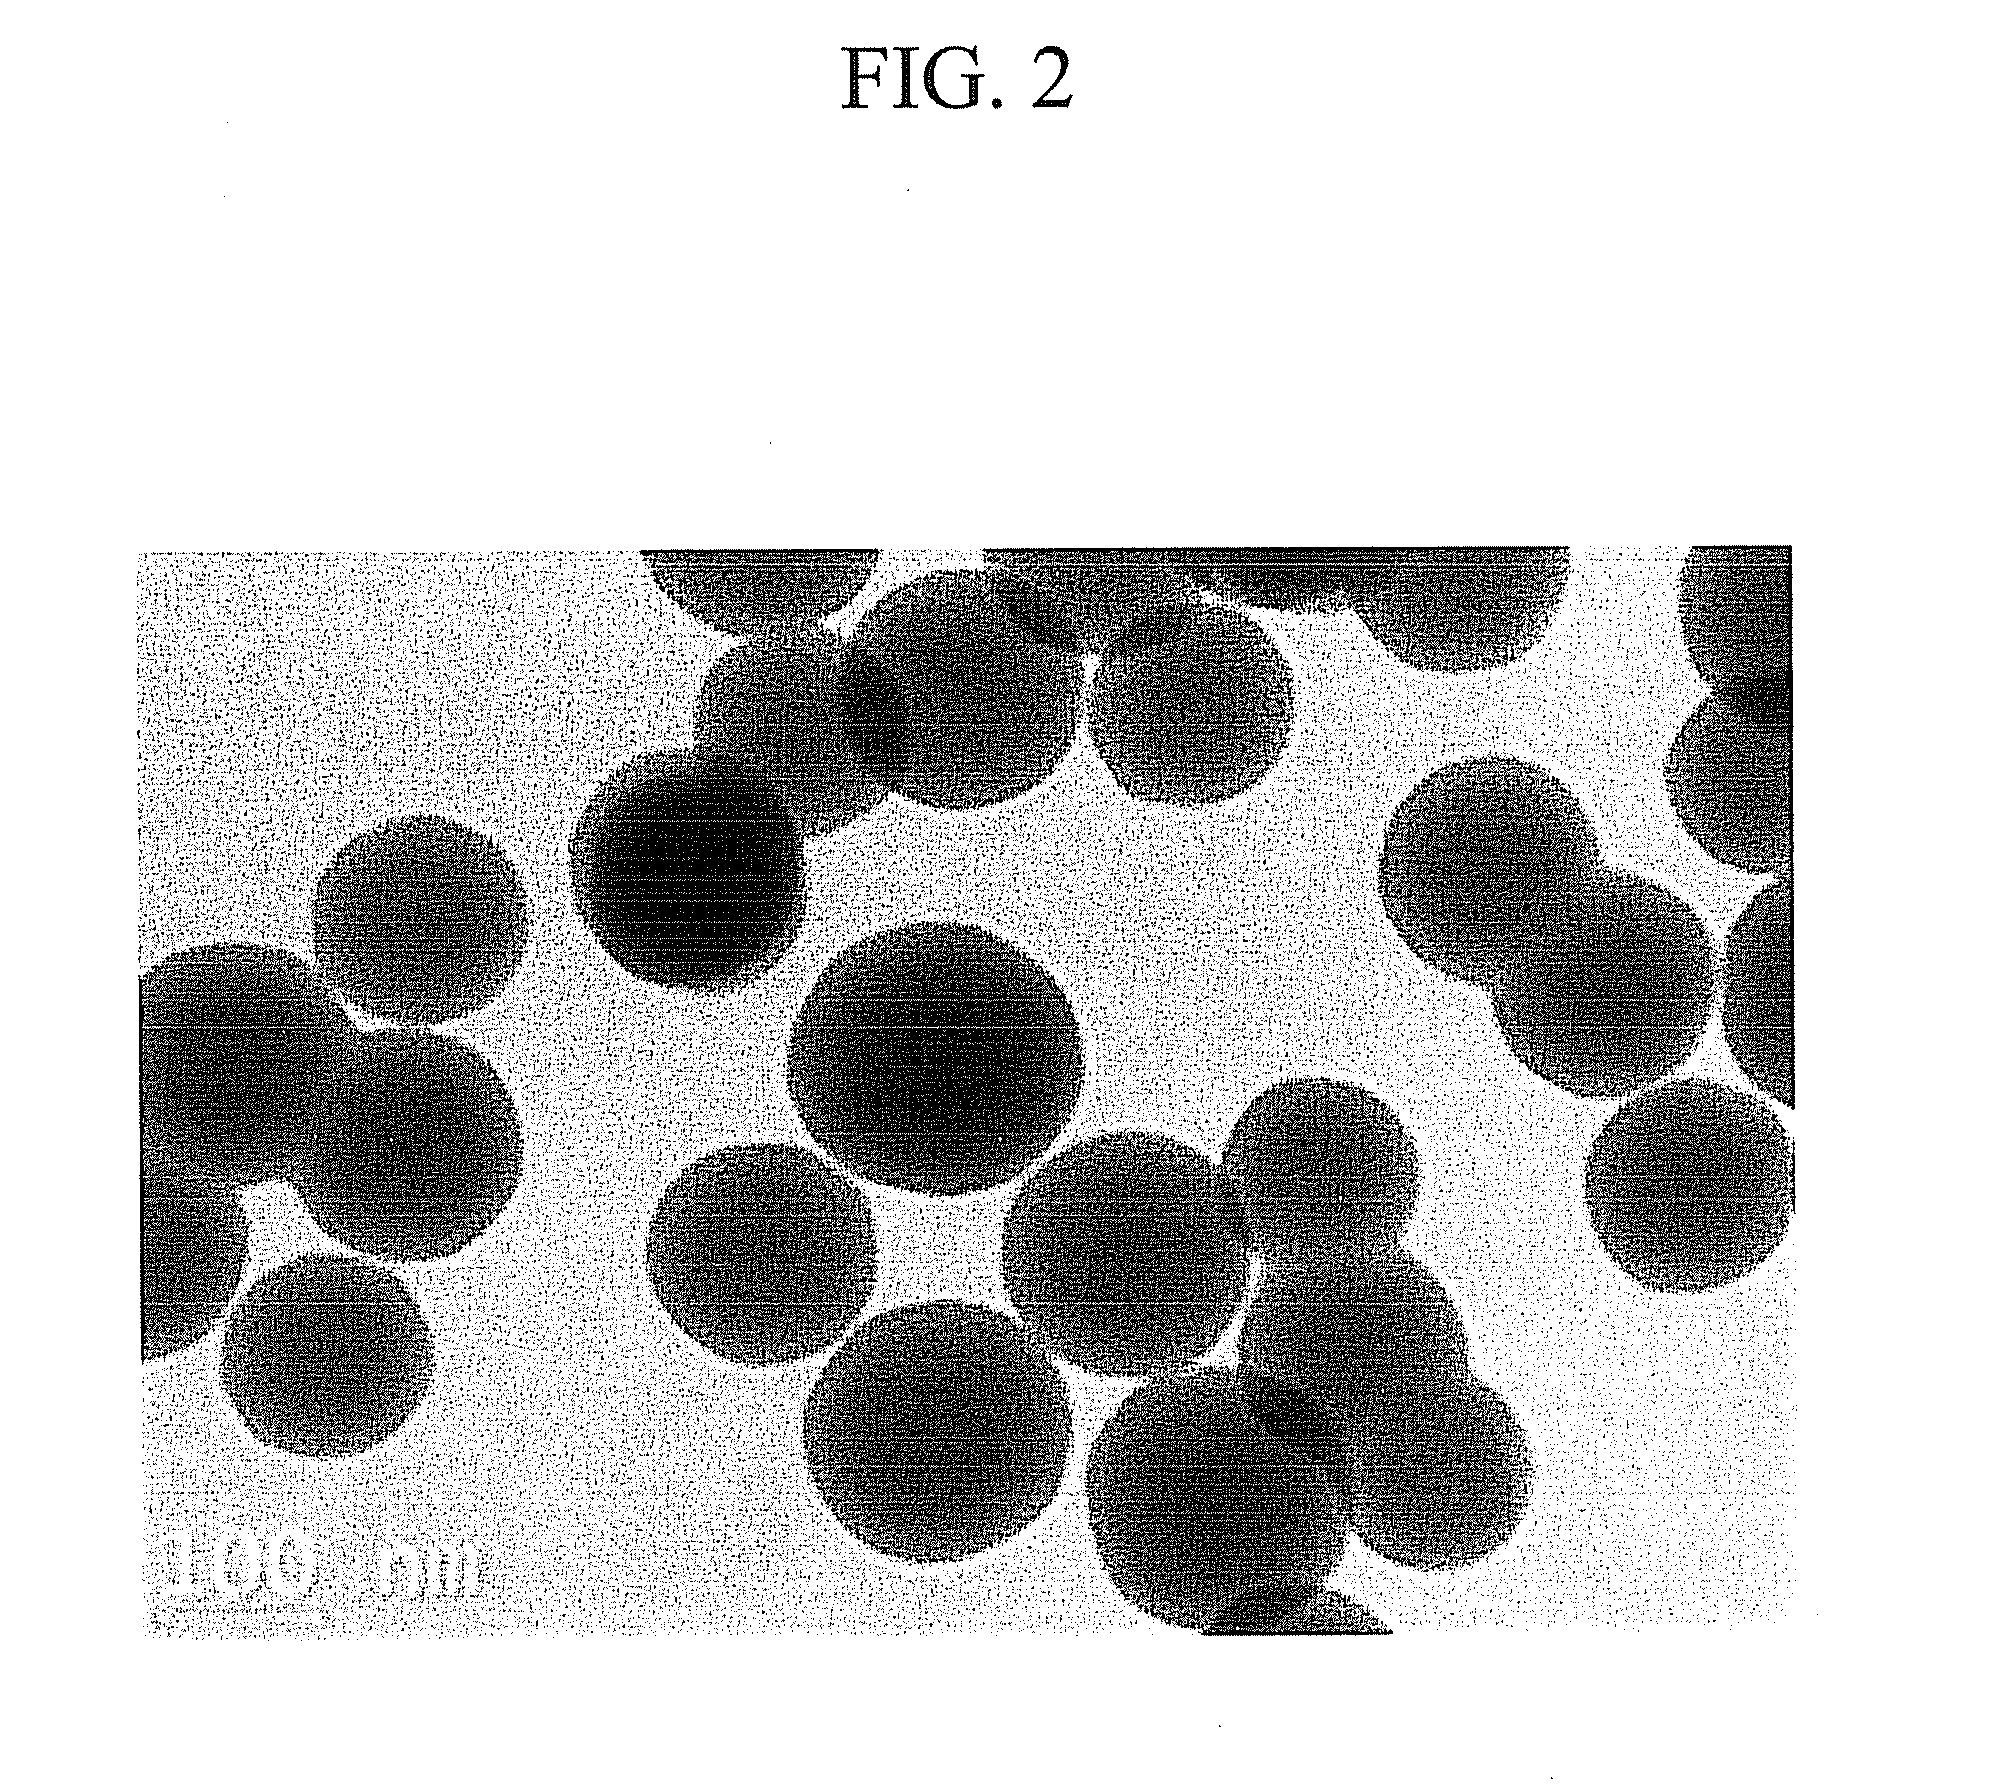 Yttrium hydroxycarbonate modified with heterogeneous metal, method of preparing the same, and adsorbent and filter device including the same